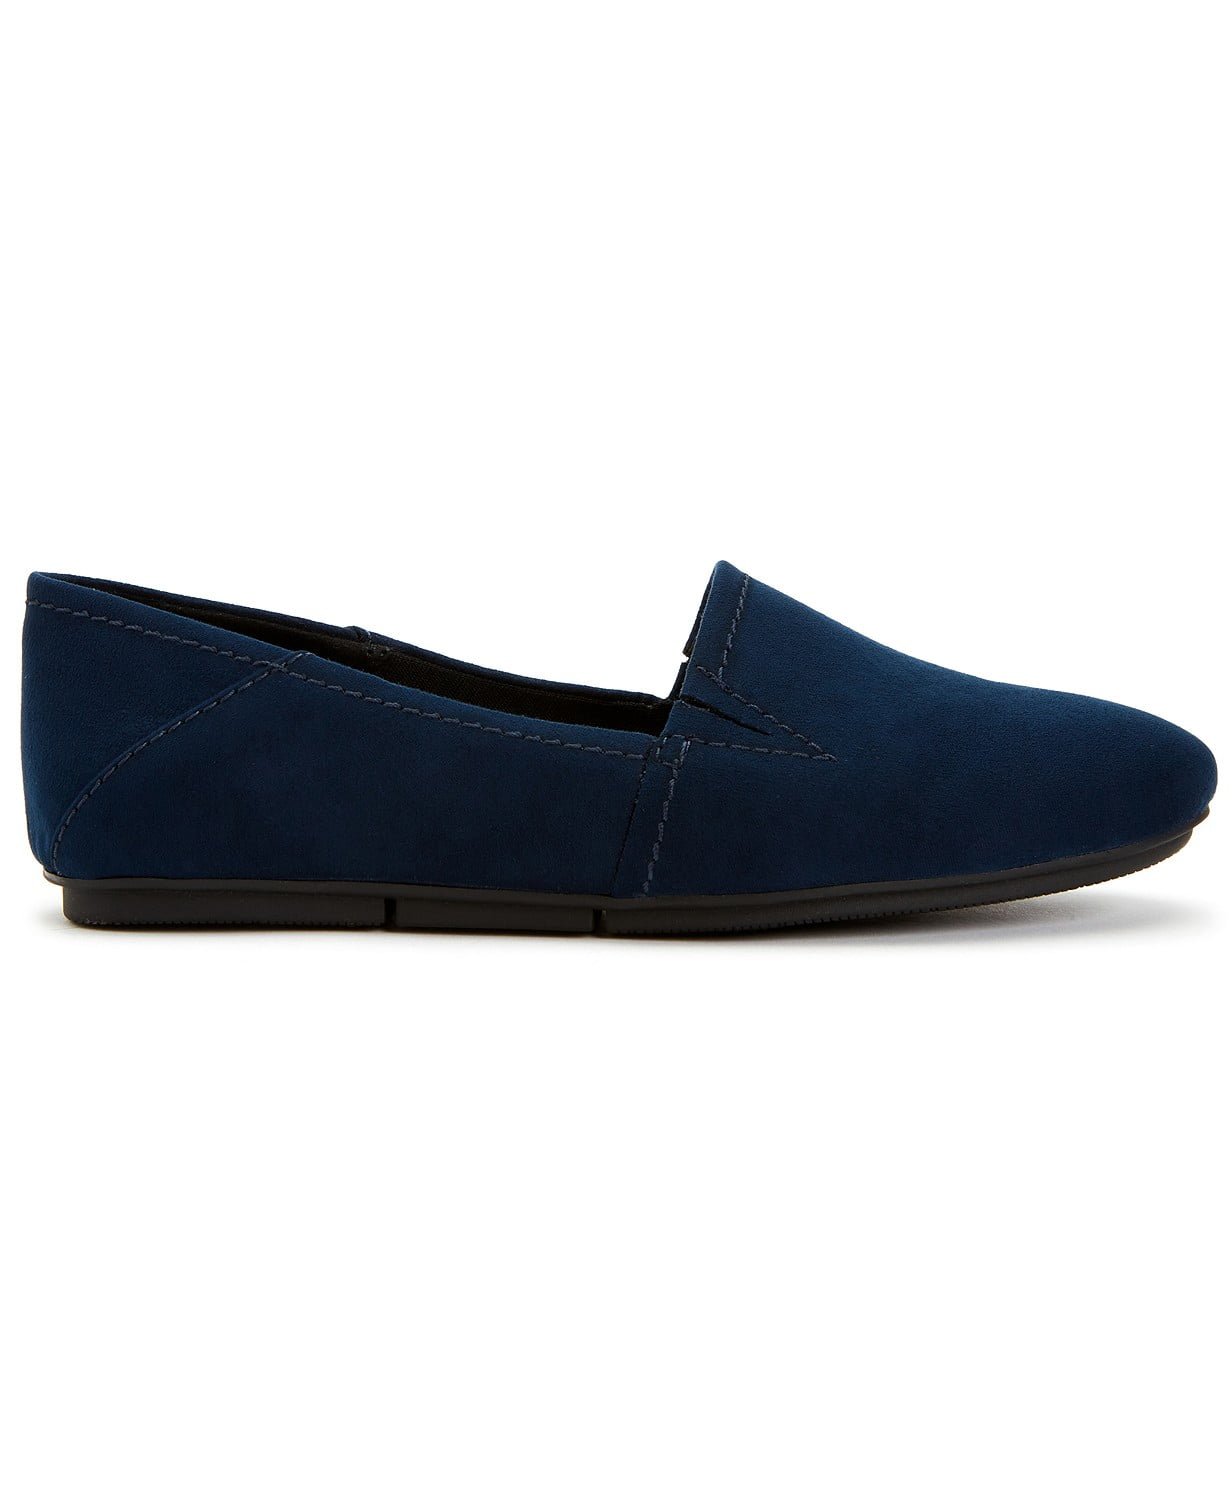 www.couturepoint.com-style-amp-co-womens-navy-nixine-slip-on-flats